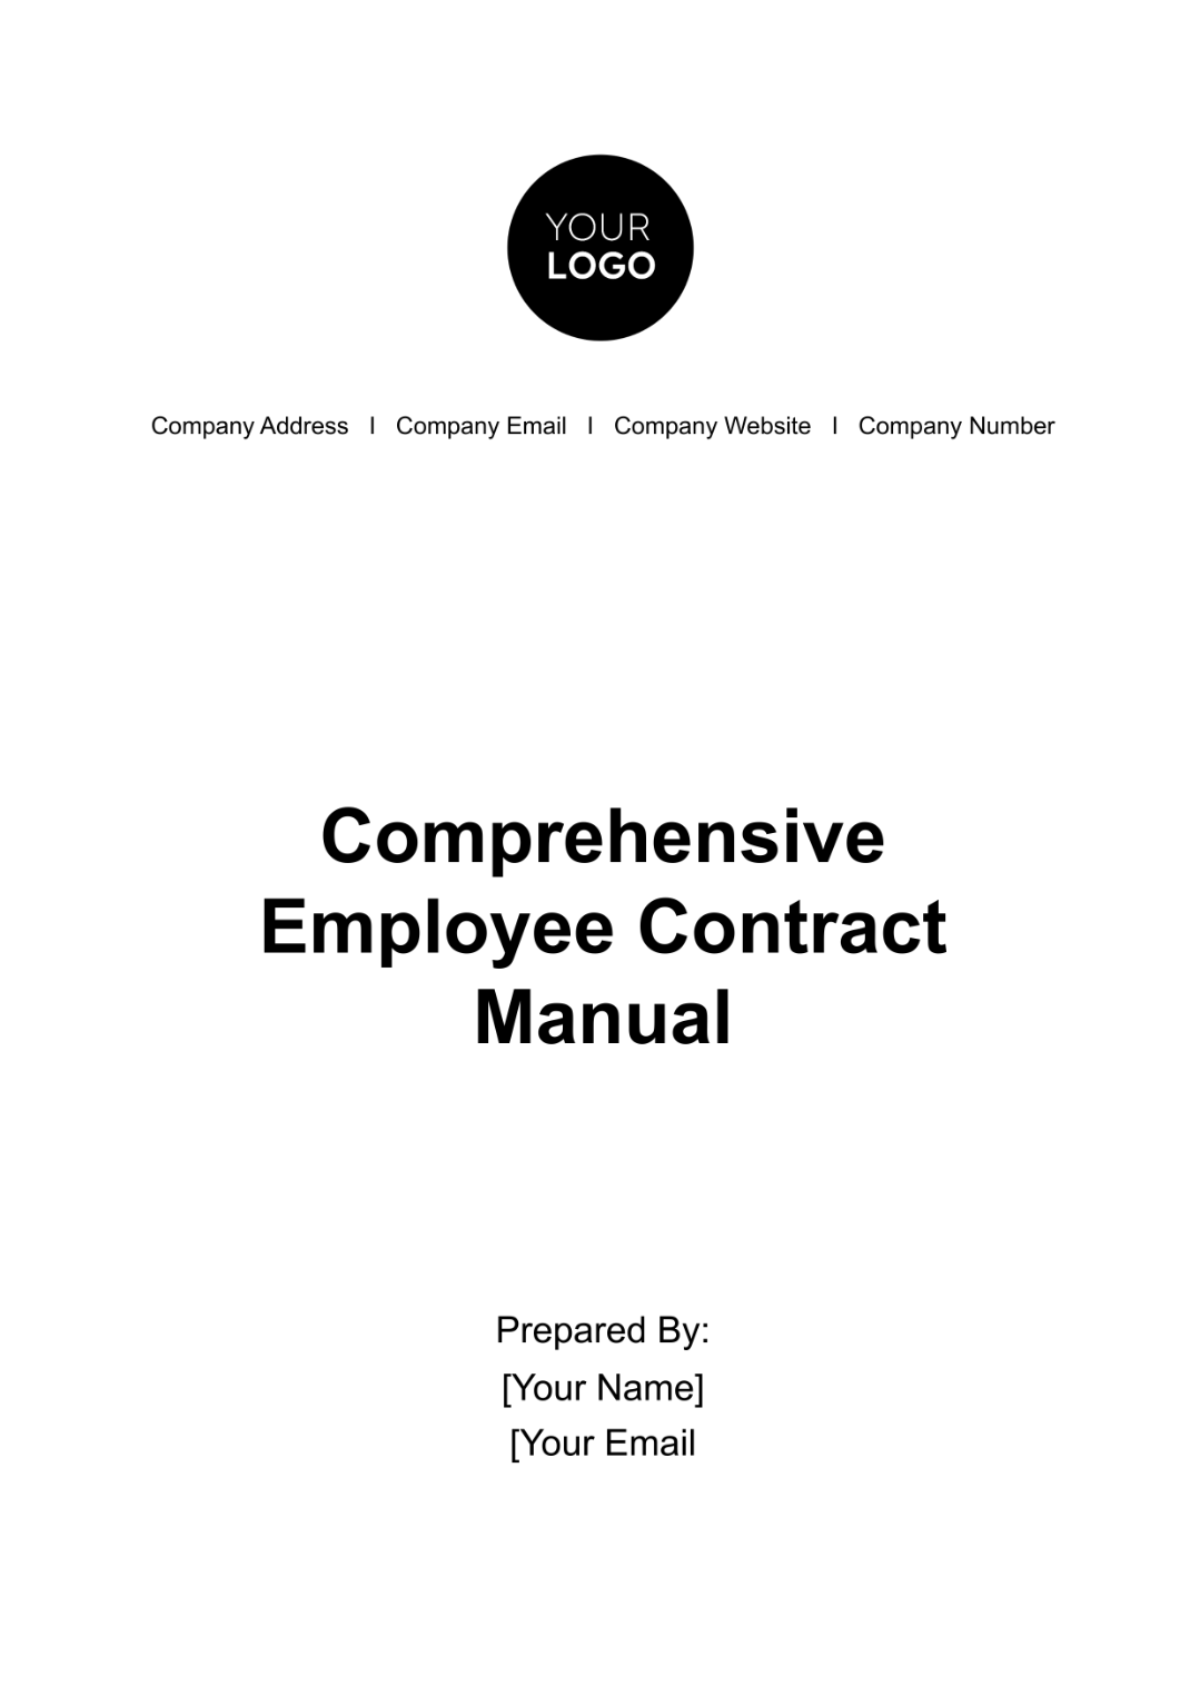 Comprehensive Employee Contract Manual HR Template